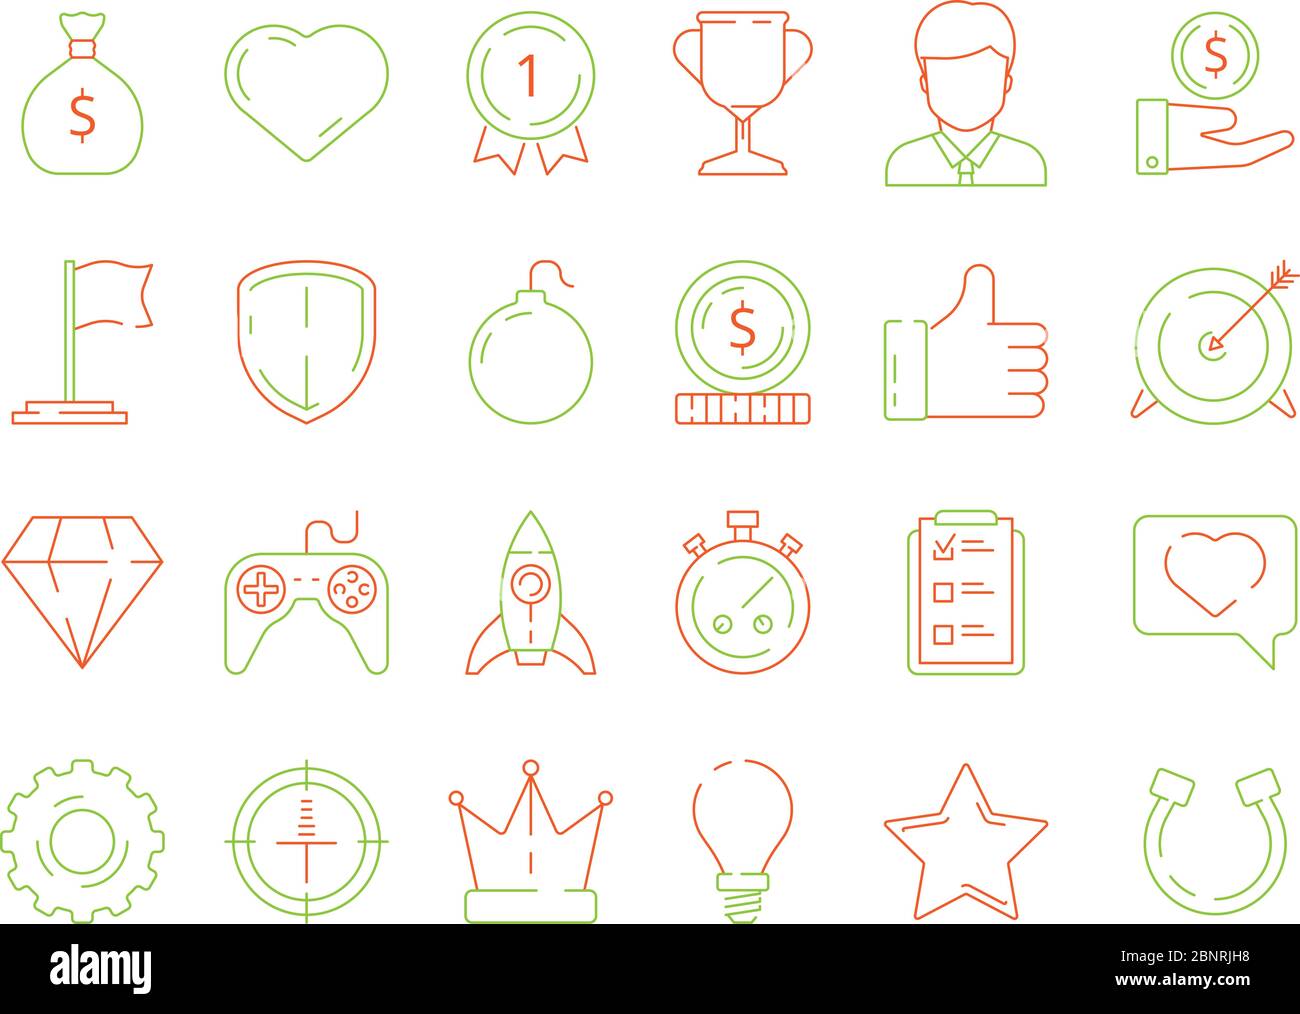 Gamification icons. business achievements line icon set for competitive office managers, advantage vector thin linear badges, levels and rewards Stock Vector